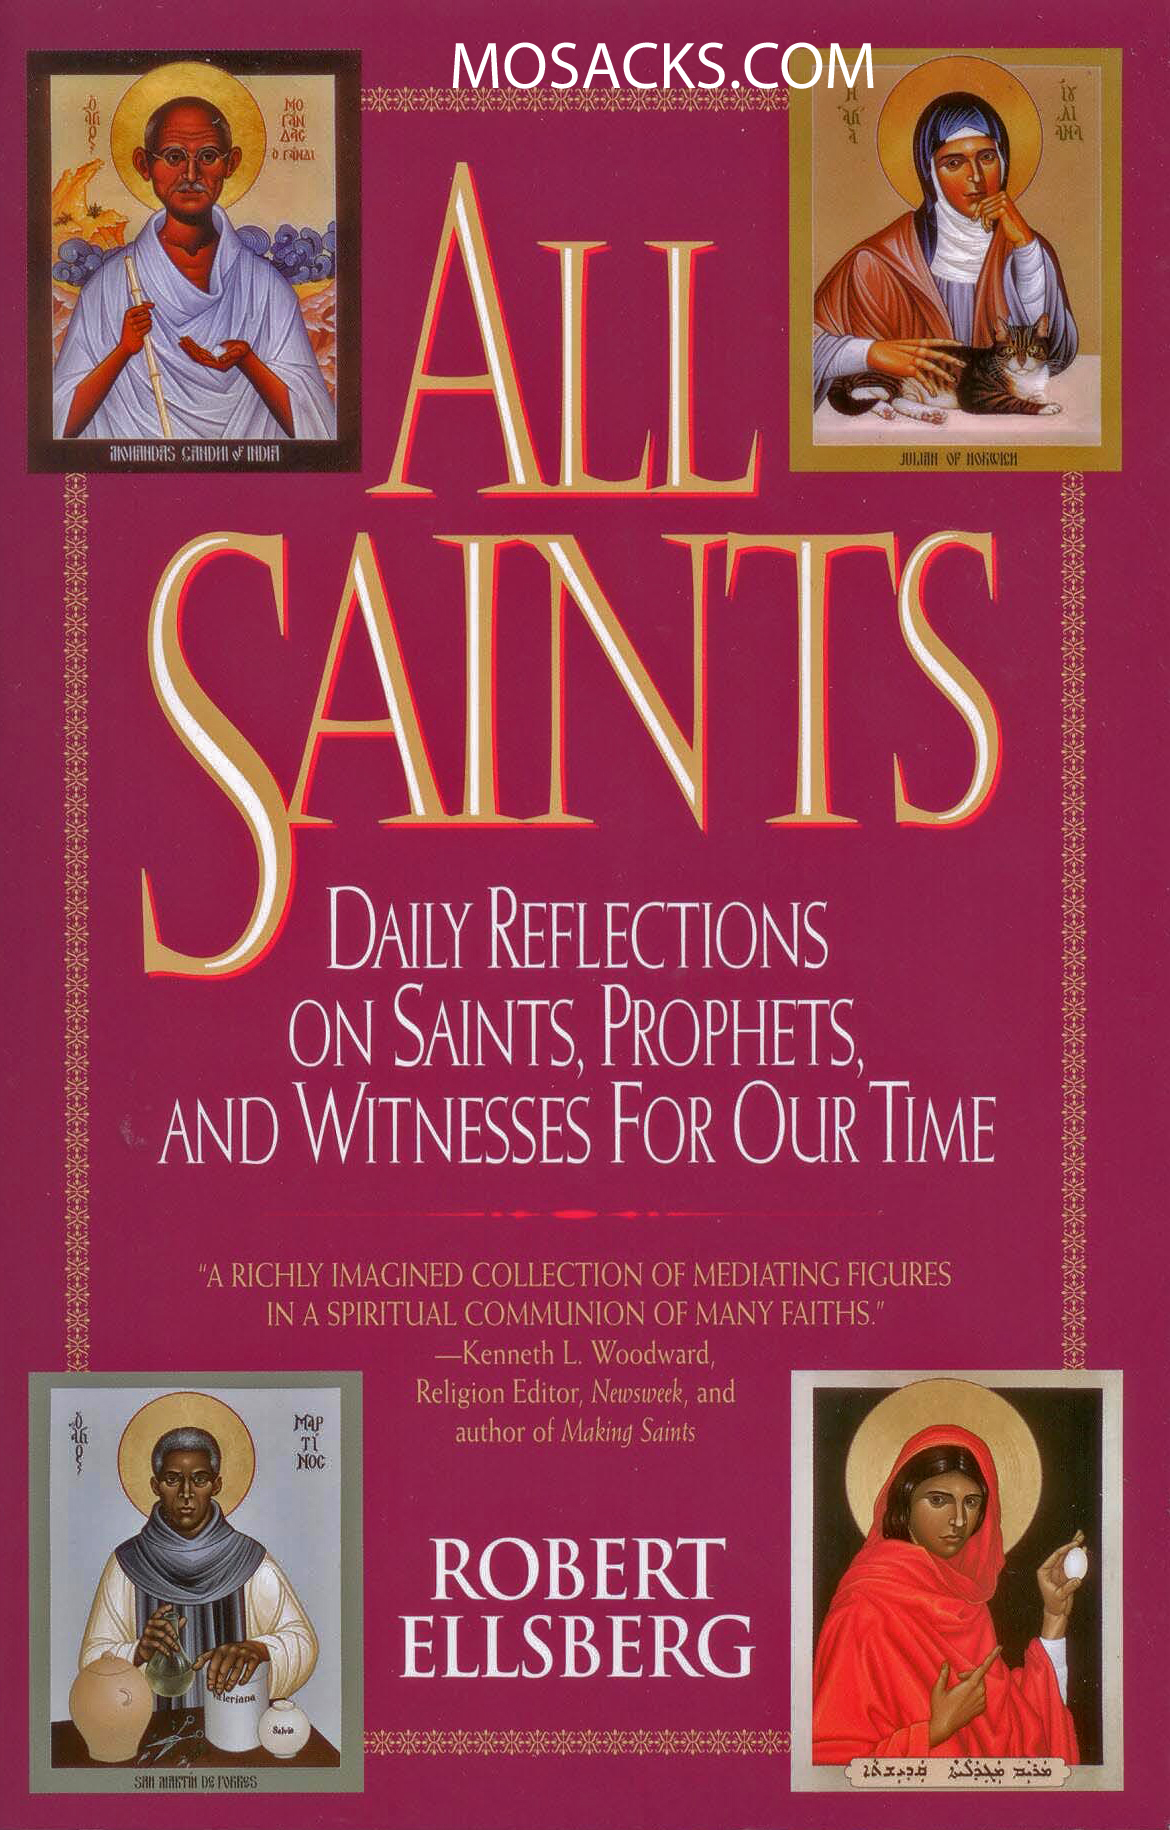 All Saints: Daily Reflections on Saints, Prophets, and Witnesses for Our Time by Robert Ellsberg